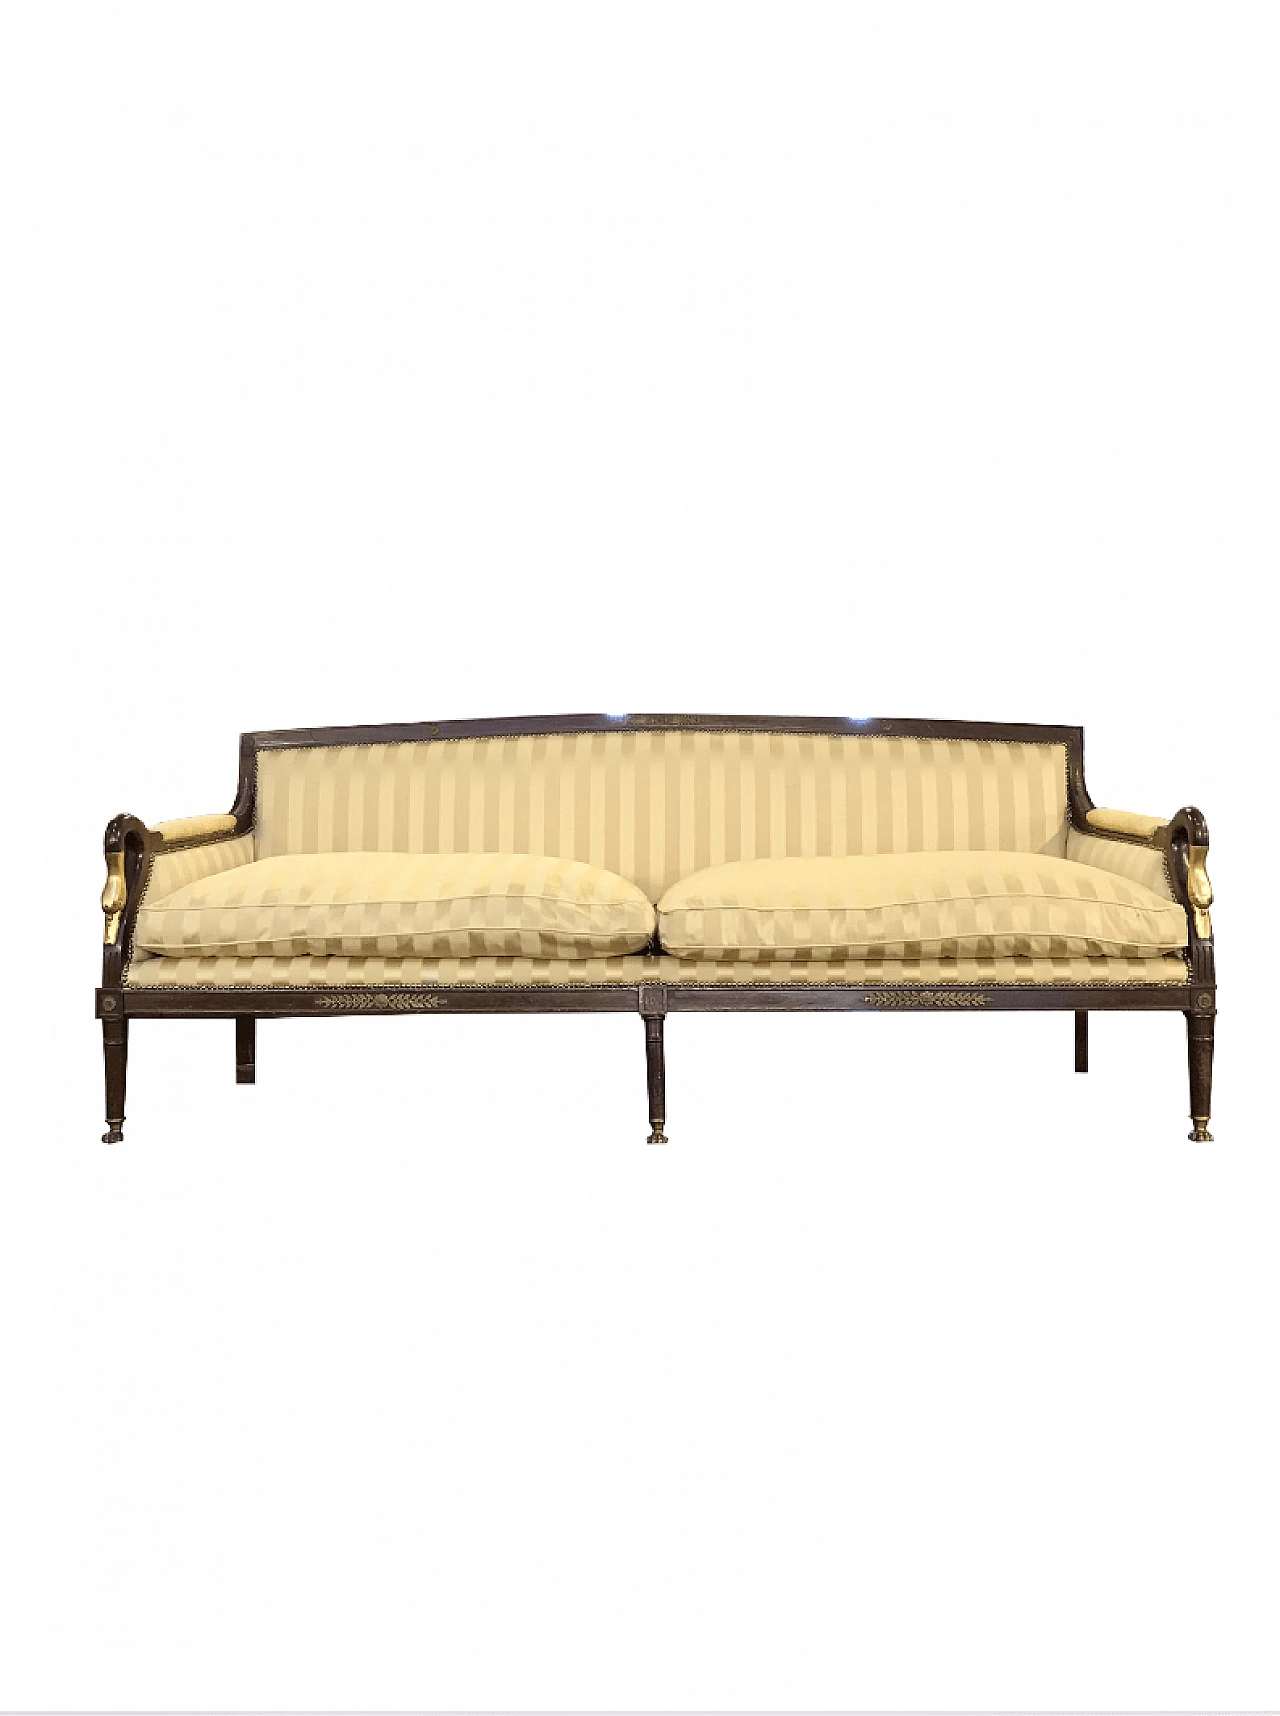 Second empire sofa in yellow gold fabric and shaped wood 1